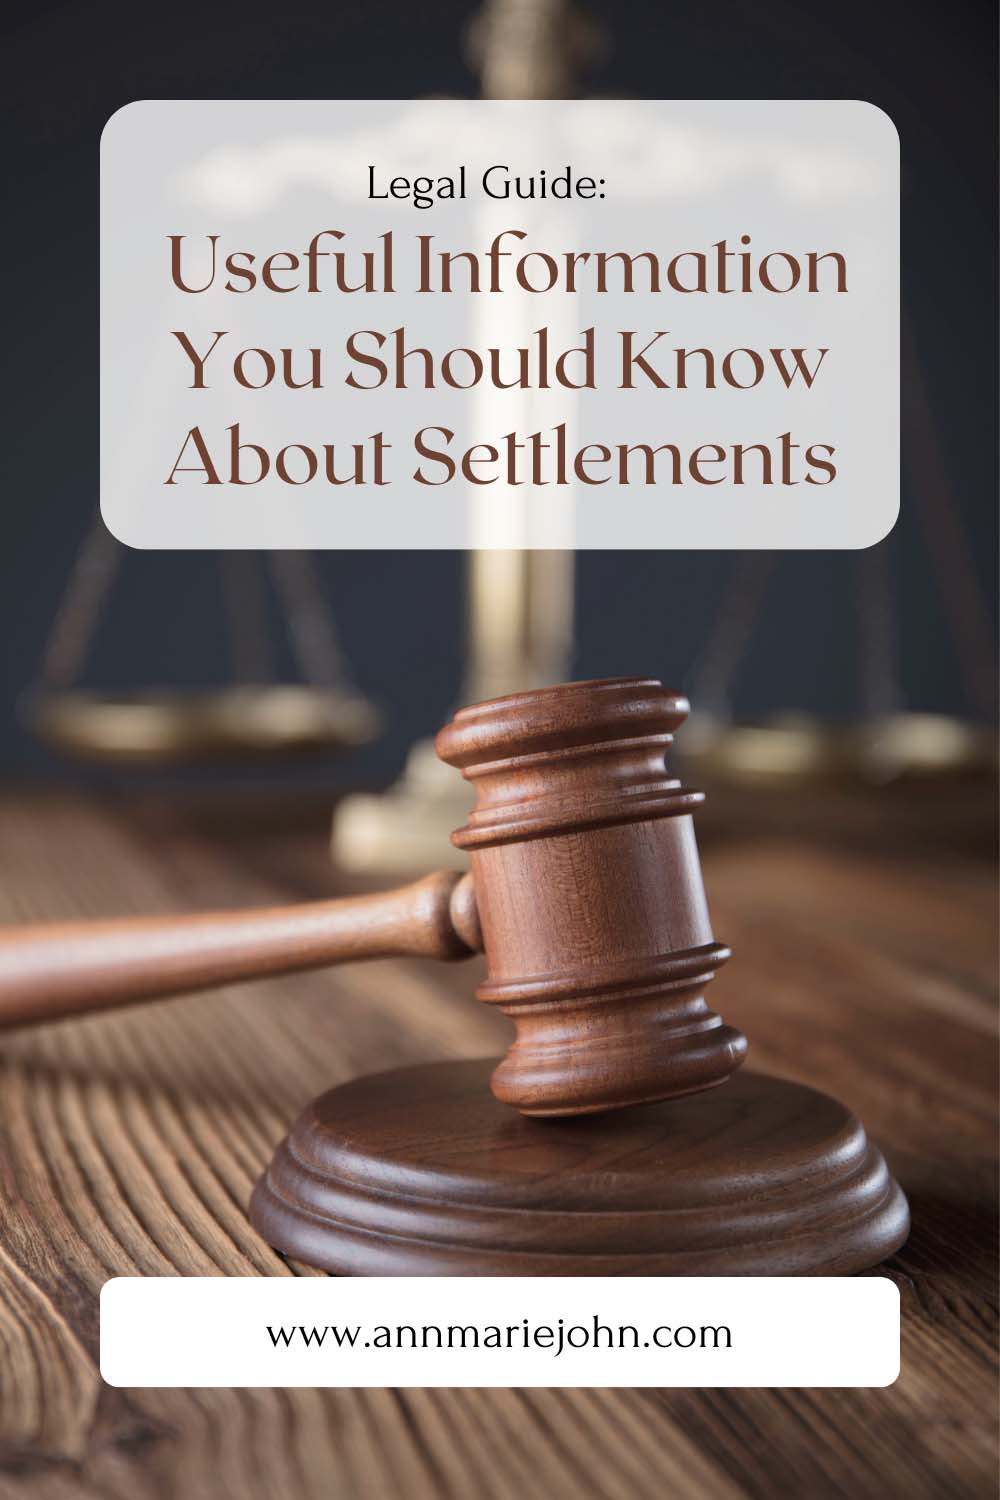 Legal Guide: Useful Information You Should Know About Settlements